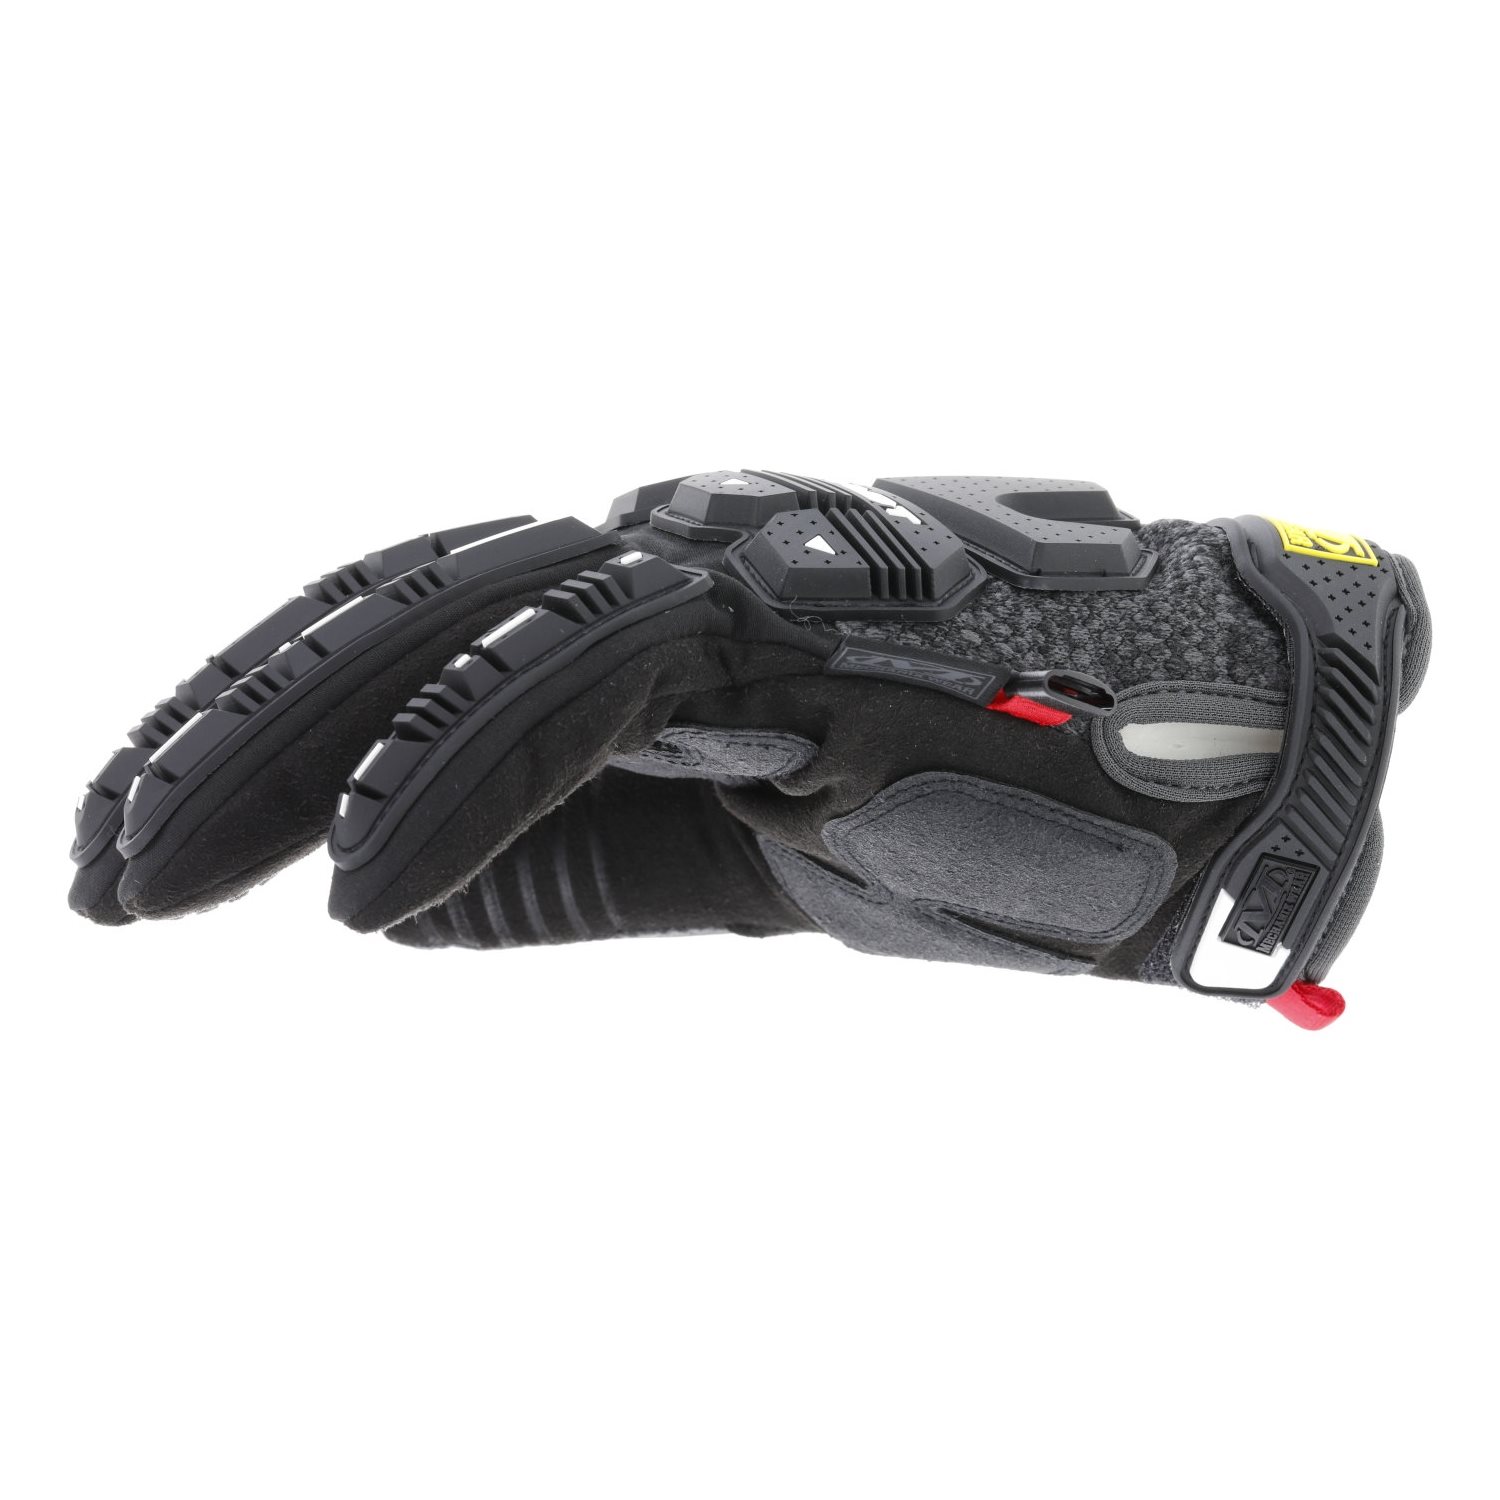 Mechanix Wear - M-Pact Glove, Black Men's Size Medium, Touchscreen Capable,  TPR Impact Protection, D30 Padded Palm 